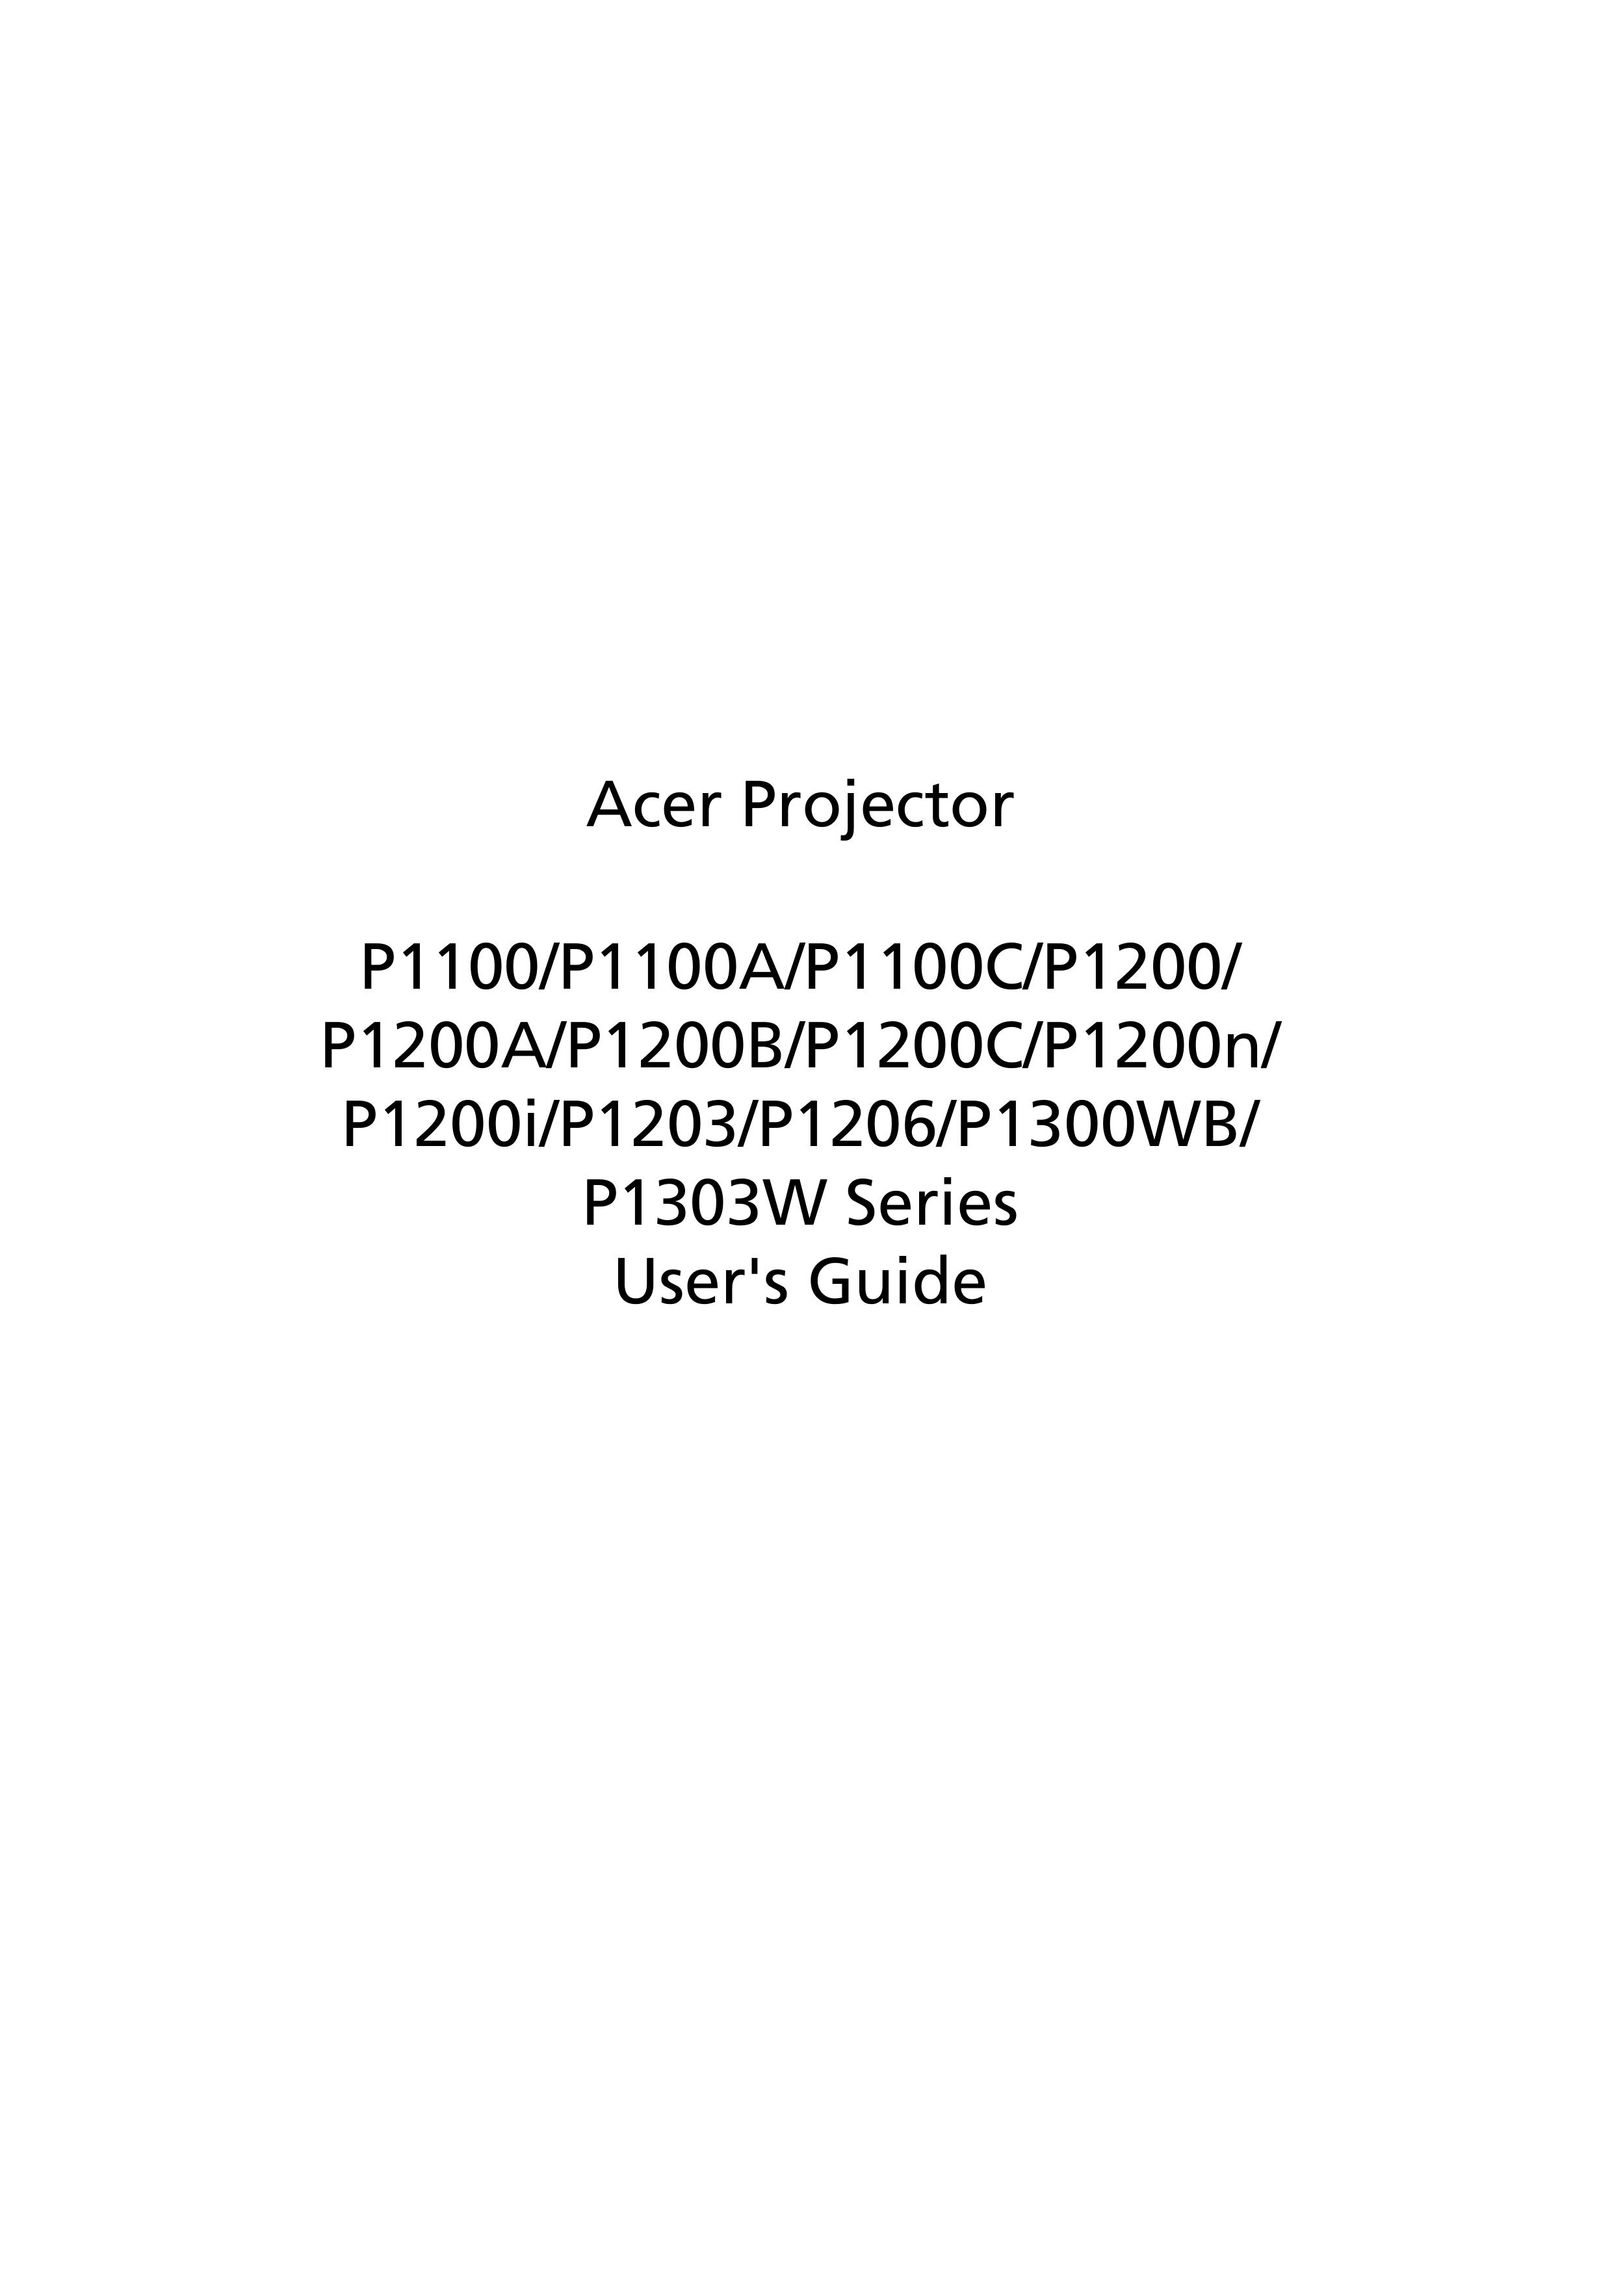 Acer P1100C Projector User Manual